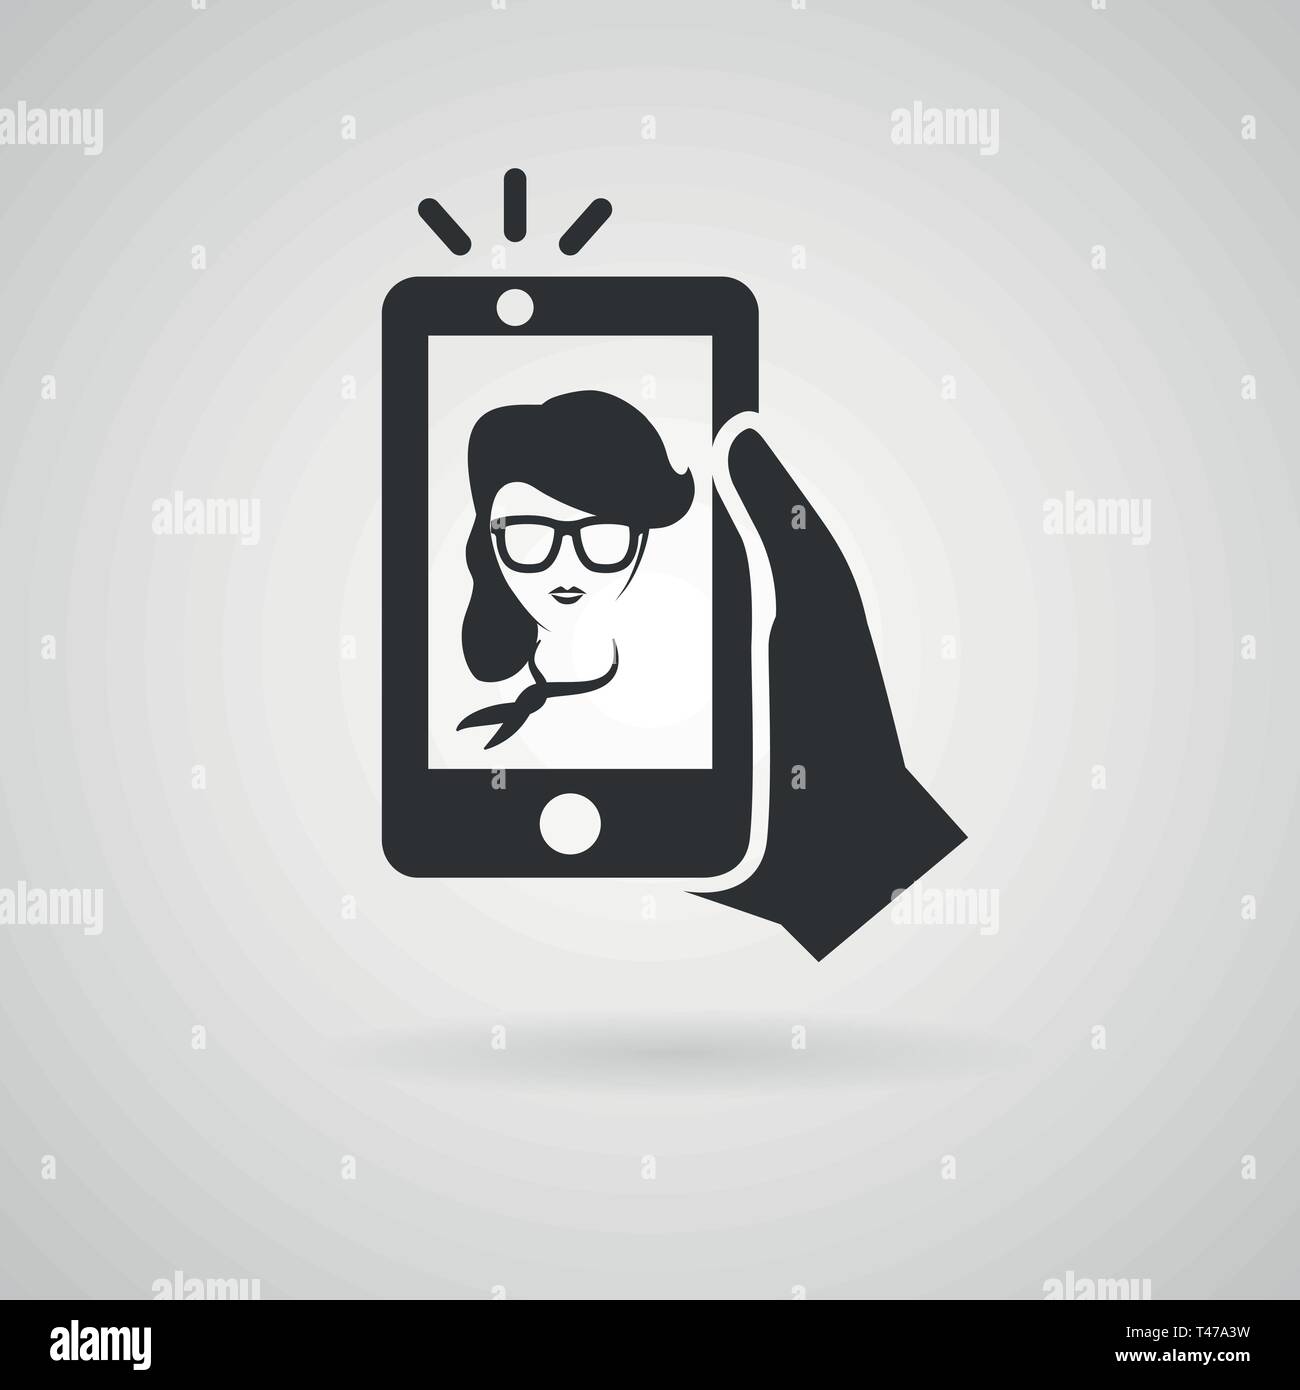 Selfie icon. Trendy woman taking a self portrait on smart phone. Vector illustration. Stock Vector